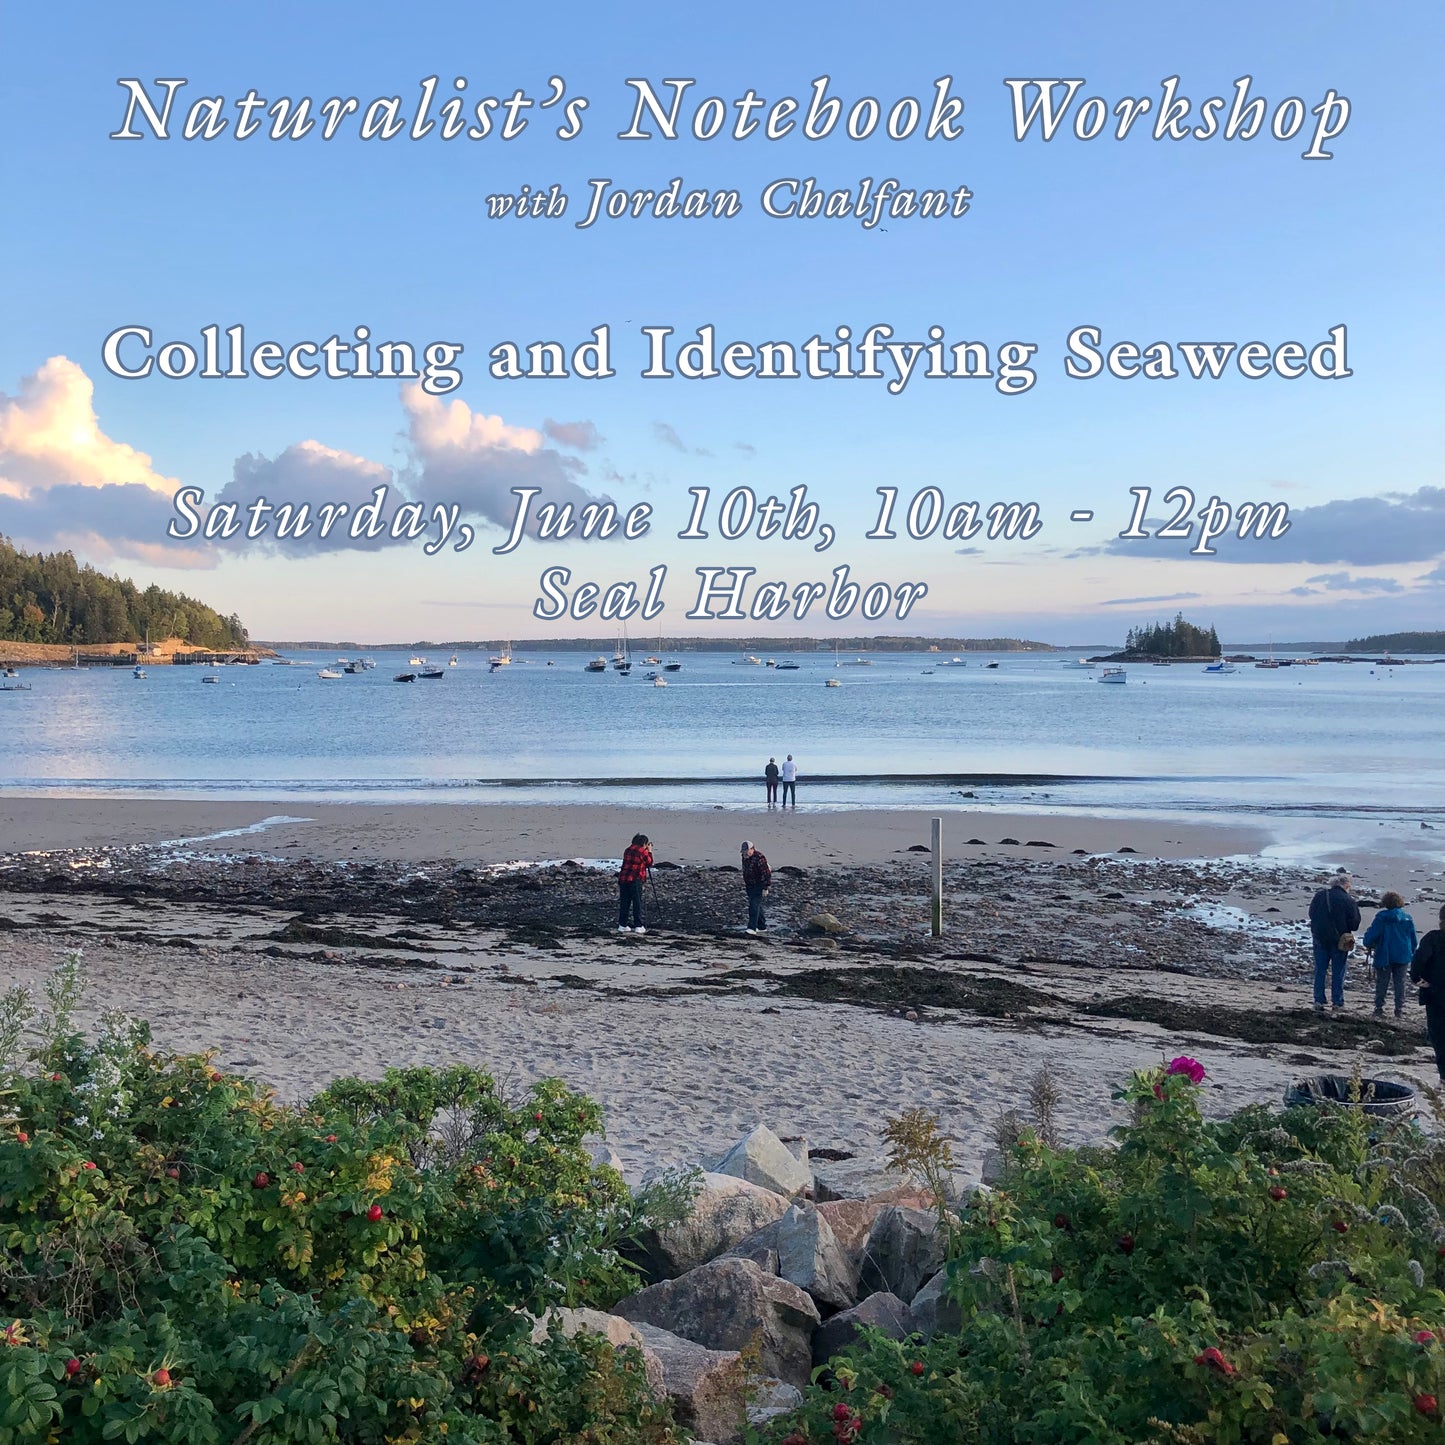 Collecting and Identifying Seaweed Workshop